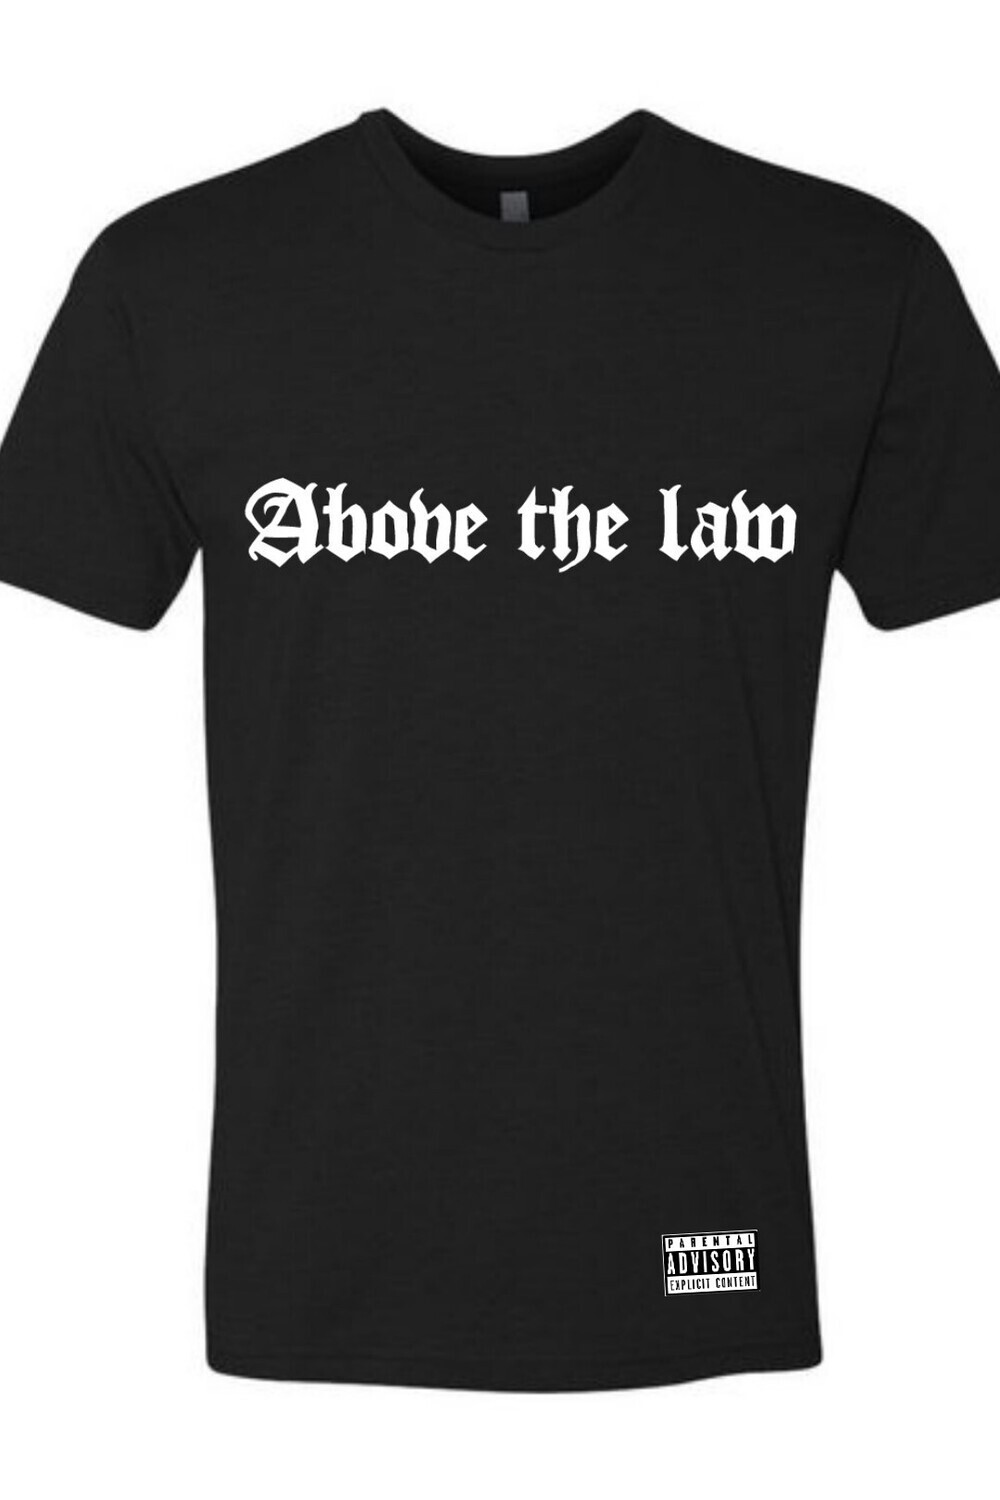 OG ABOVE THE LAW CLASSIC T SHIRTS